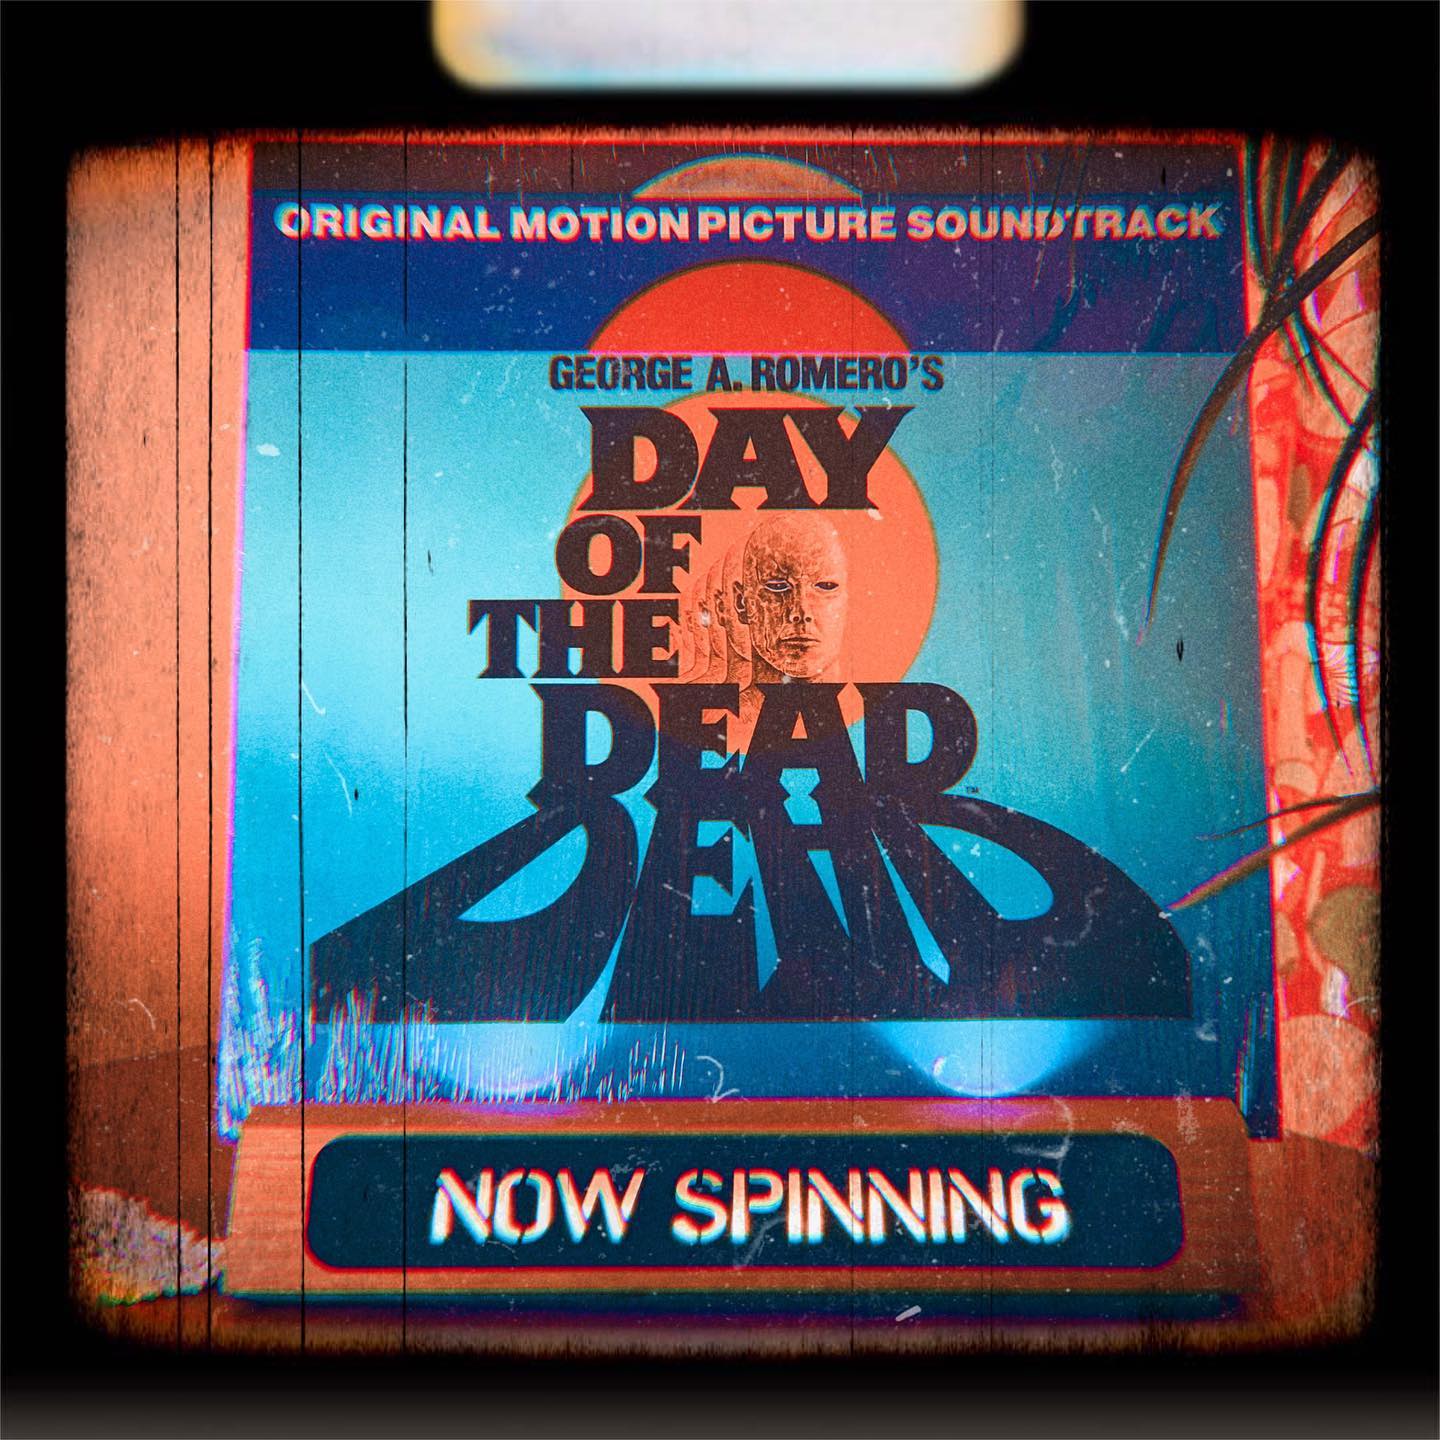 Vinyl-a-Day 51: John Harrison - “Day of the Dead: Original Motion Picture Soundtrack” (Saturn Records, 1985)